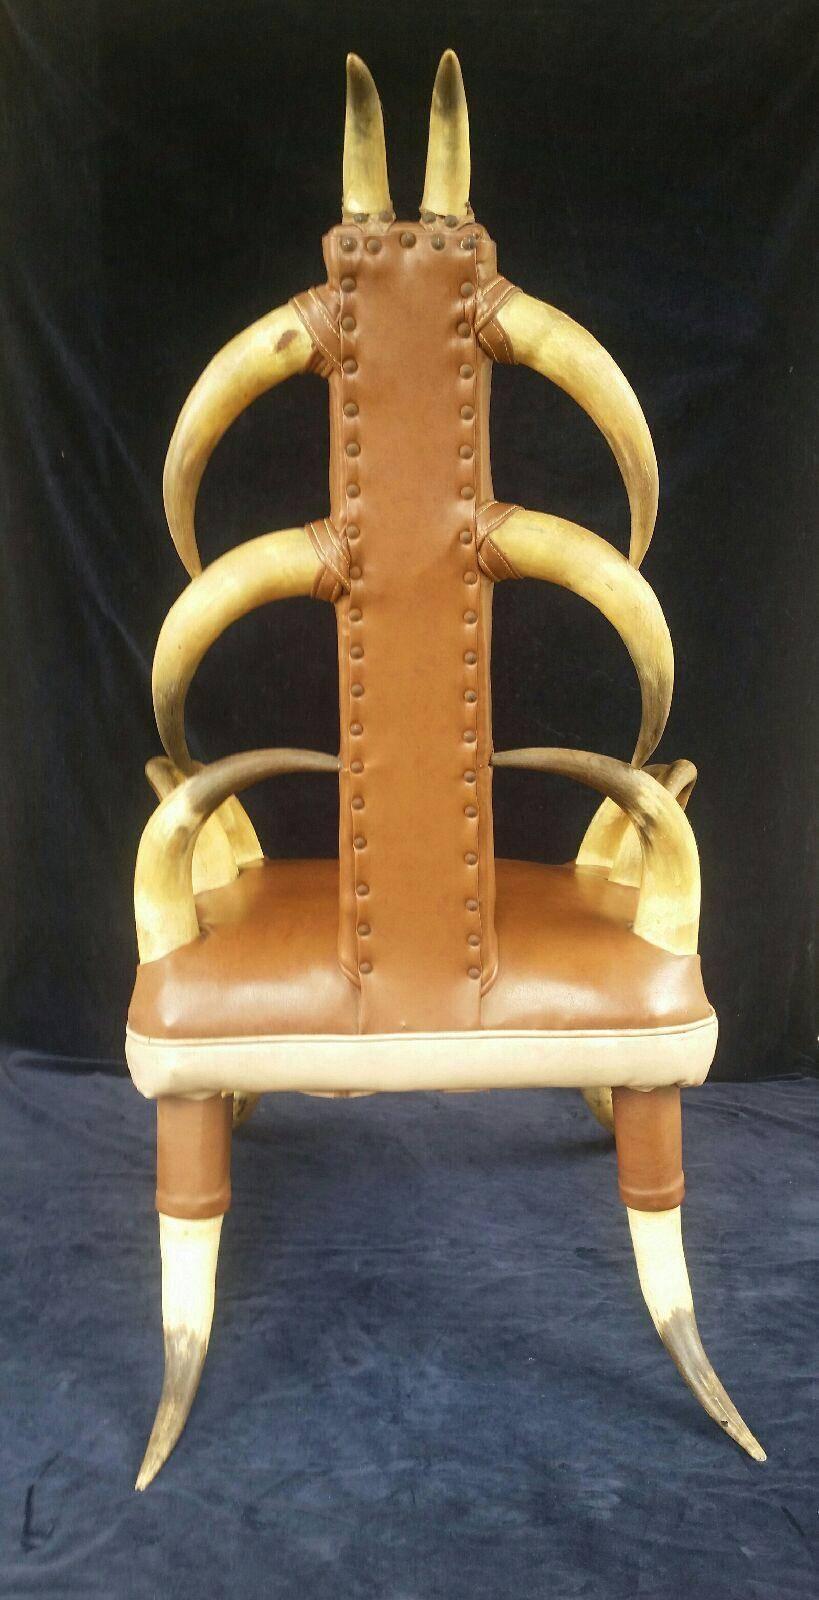 Vintage steer horn parlor chair. Description: Striking 20th century decorative parlor chair crafted with steer horn with brown vinyl upholstery.